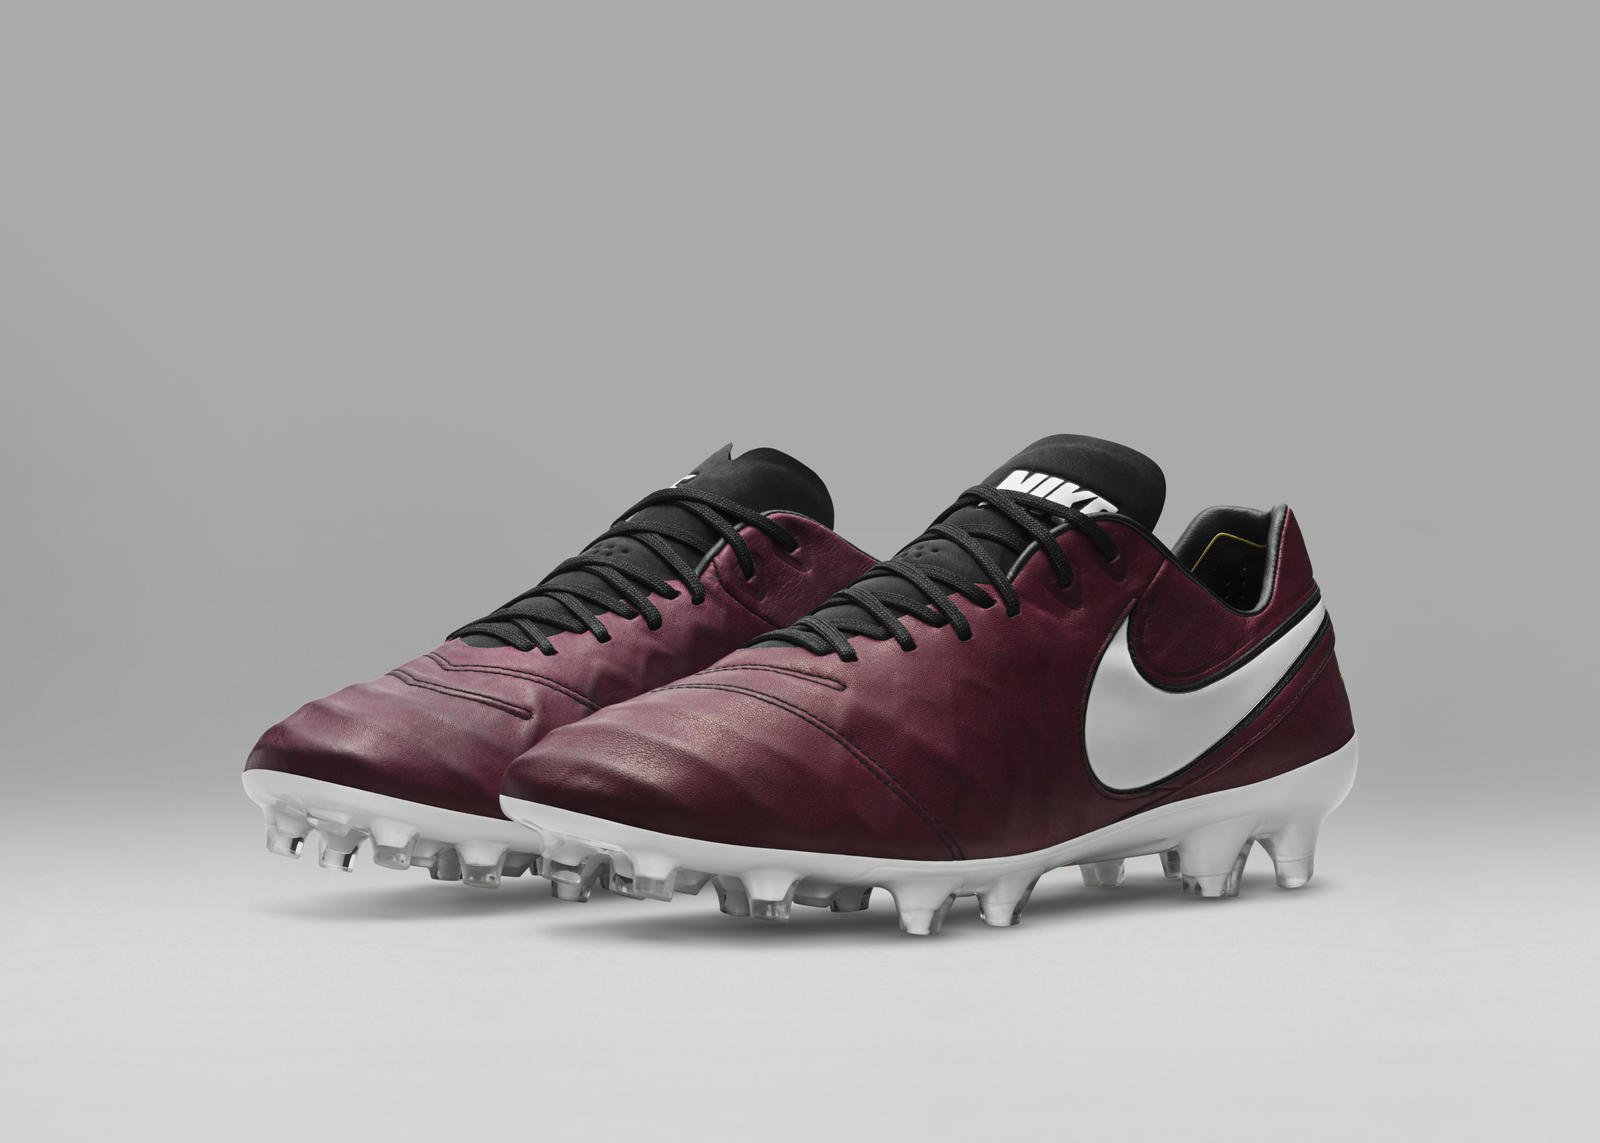 B/R Football en Twitter: "Inspired by Andrea Pirlo's passion for wine, limited edition Nike Tiempo Pirlo boots 👀 (via https://t.co/ZfPjkQhhNE" / Twitter